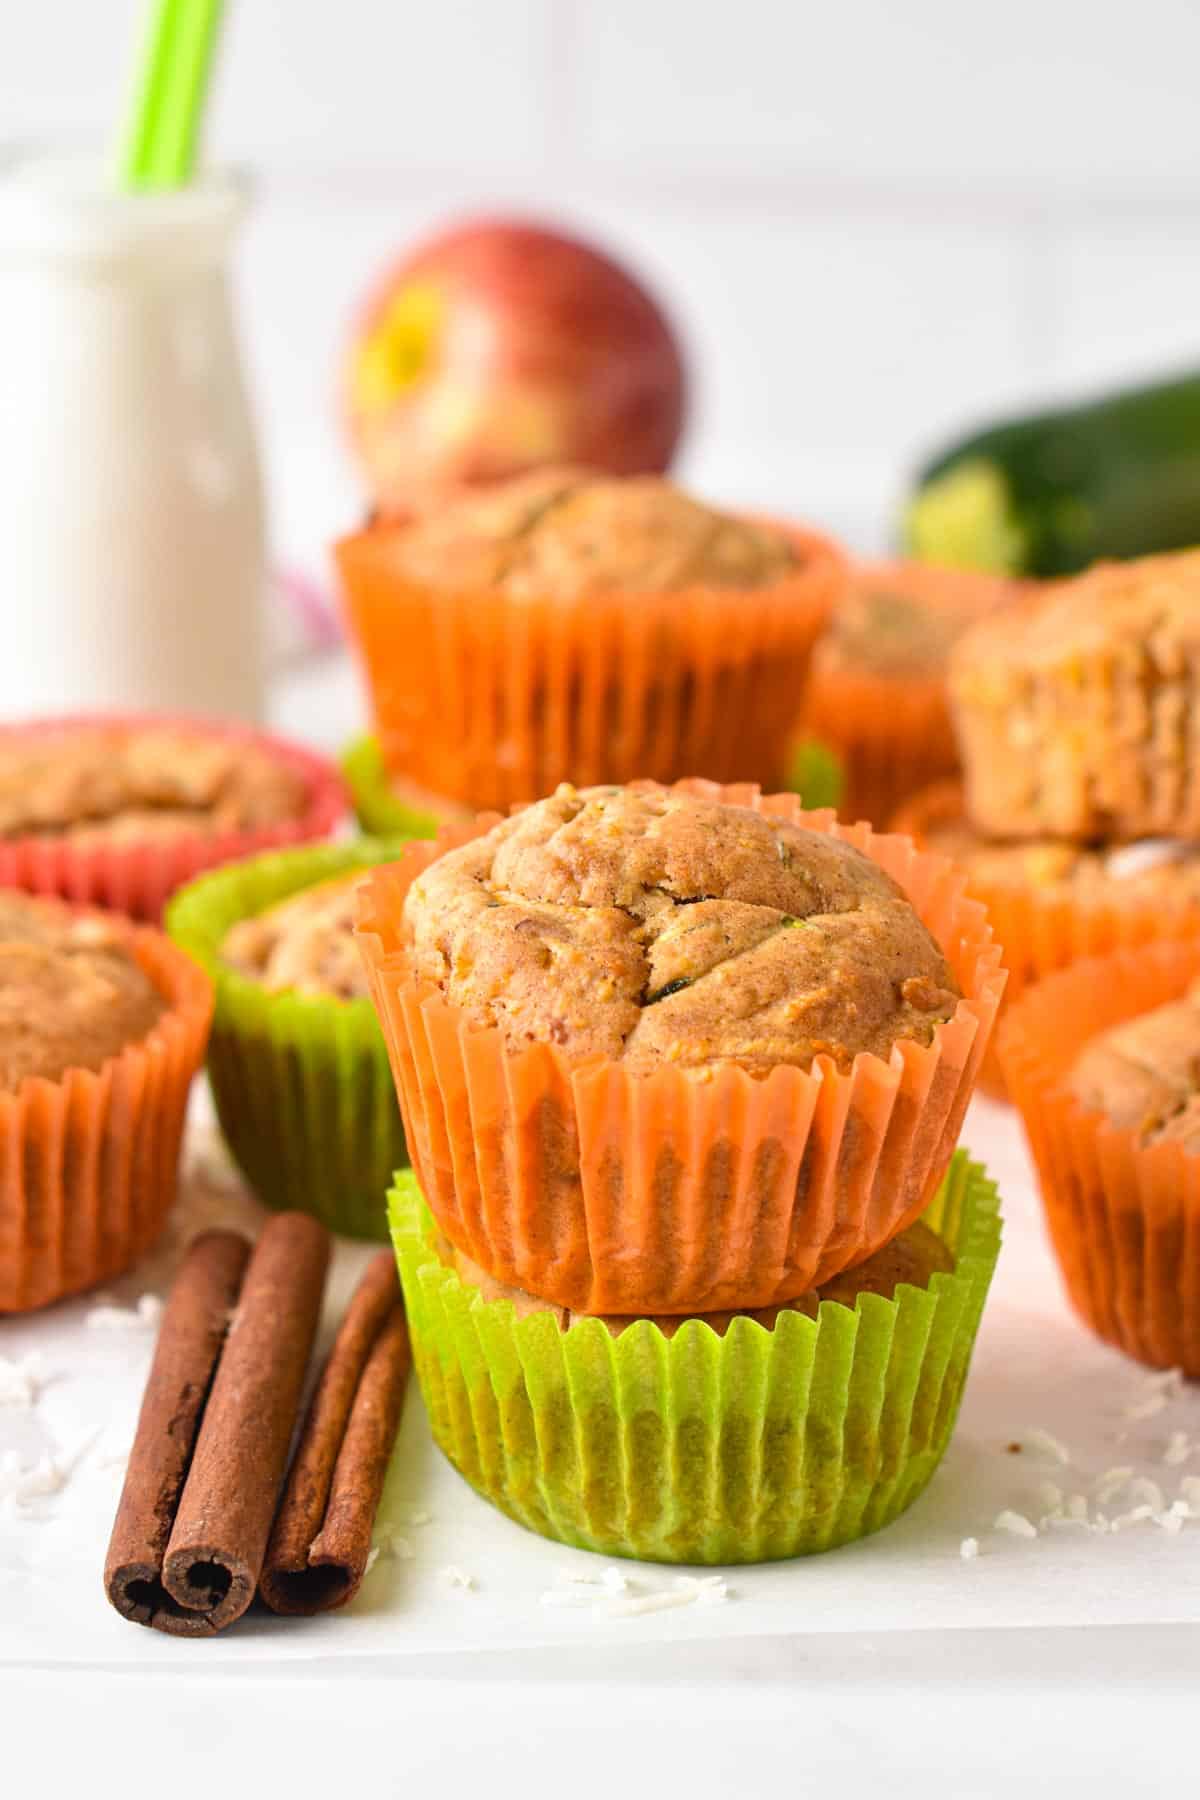 These Zucchini Carrot Apple Muffins are easy, healthy muffins for kids packed with 3 fruits and vegetables for a boost of vitamins. Plus, these are easy to freeze and make ahead to prepare lots of healthy snacks.